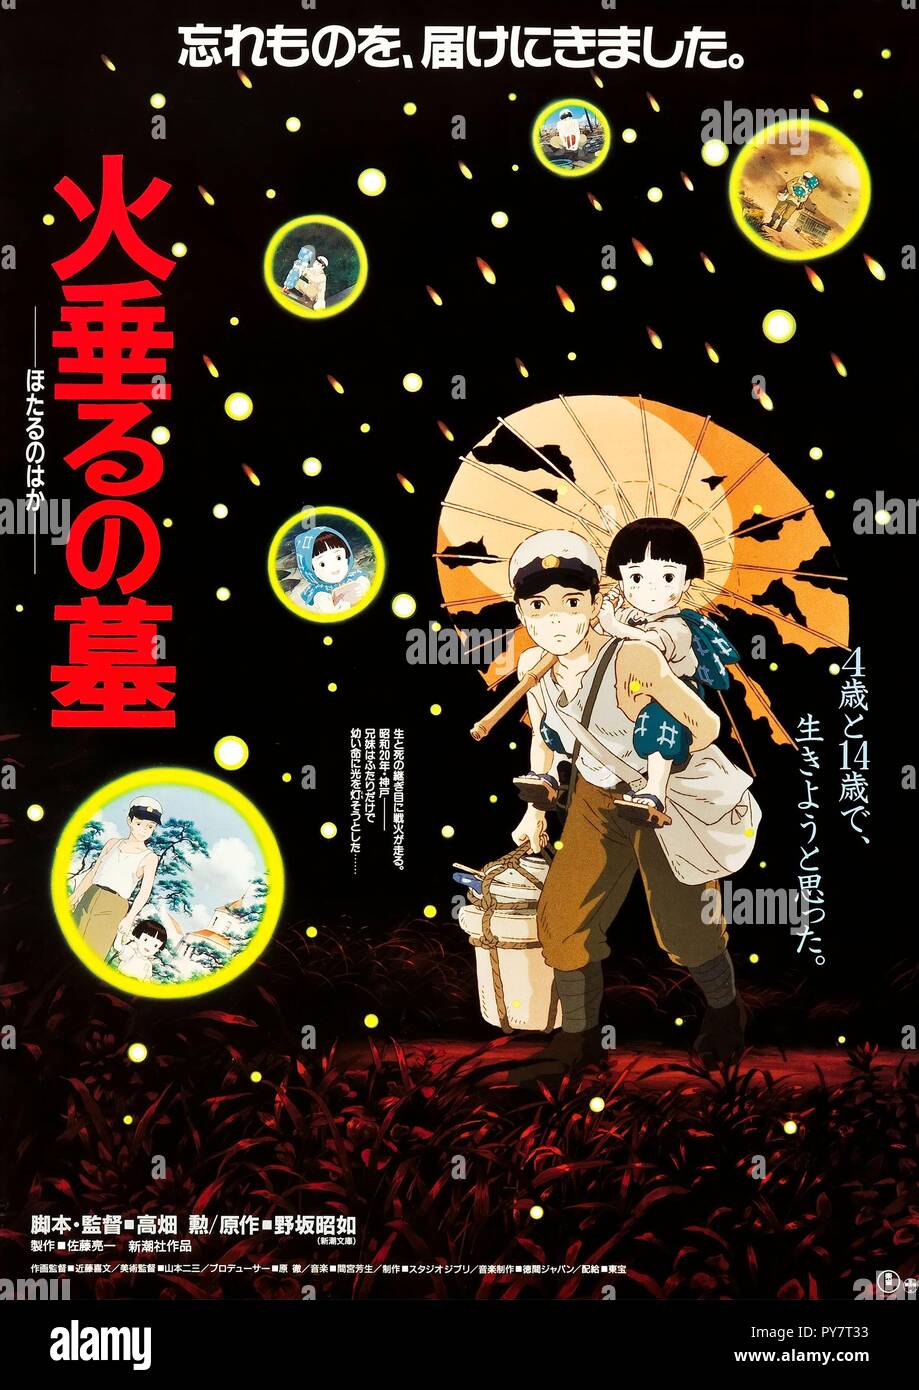 Grave of the Fireflies' Poster Has Heartbreaking Easter Egg